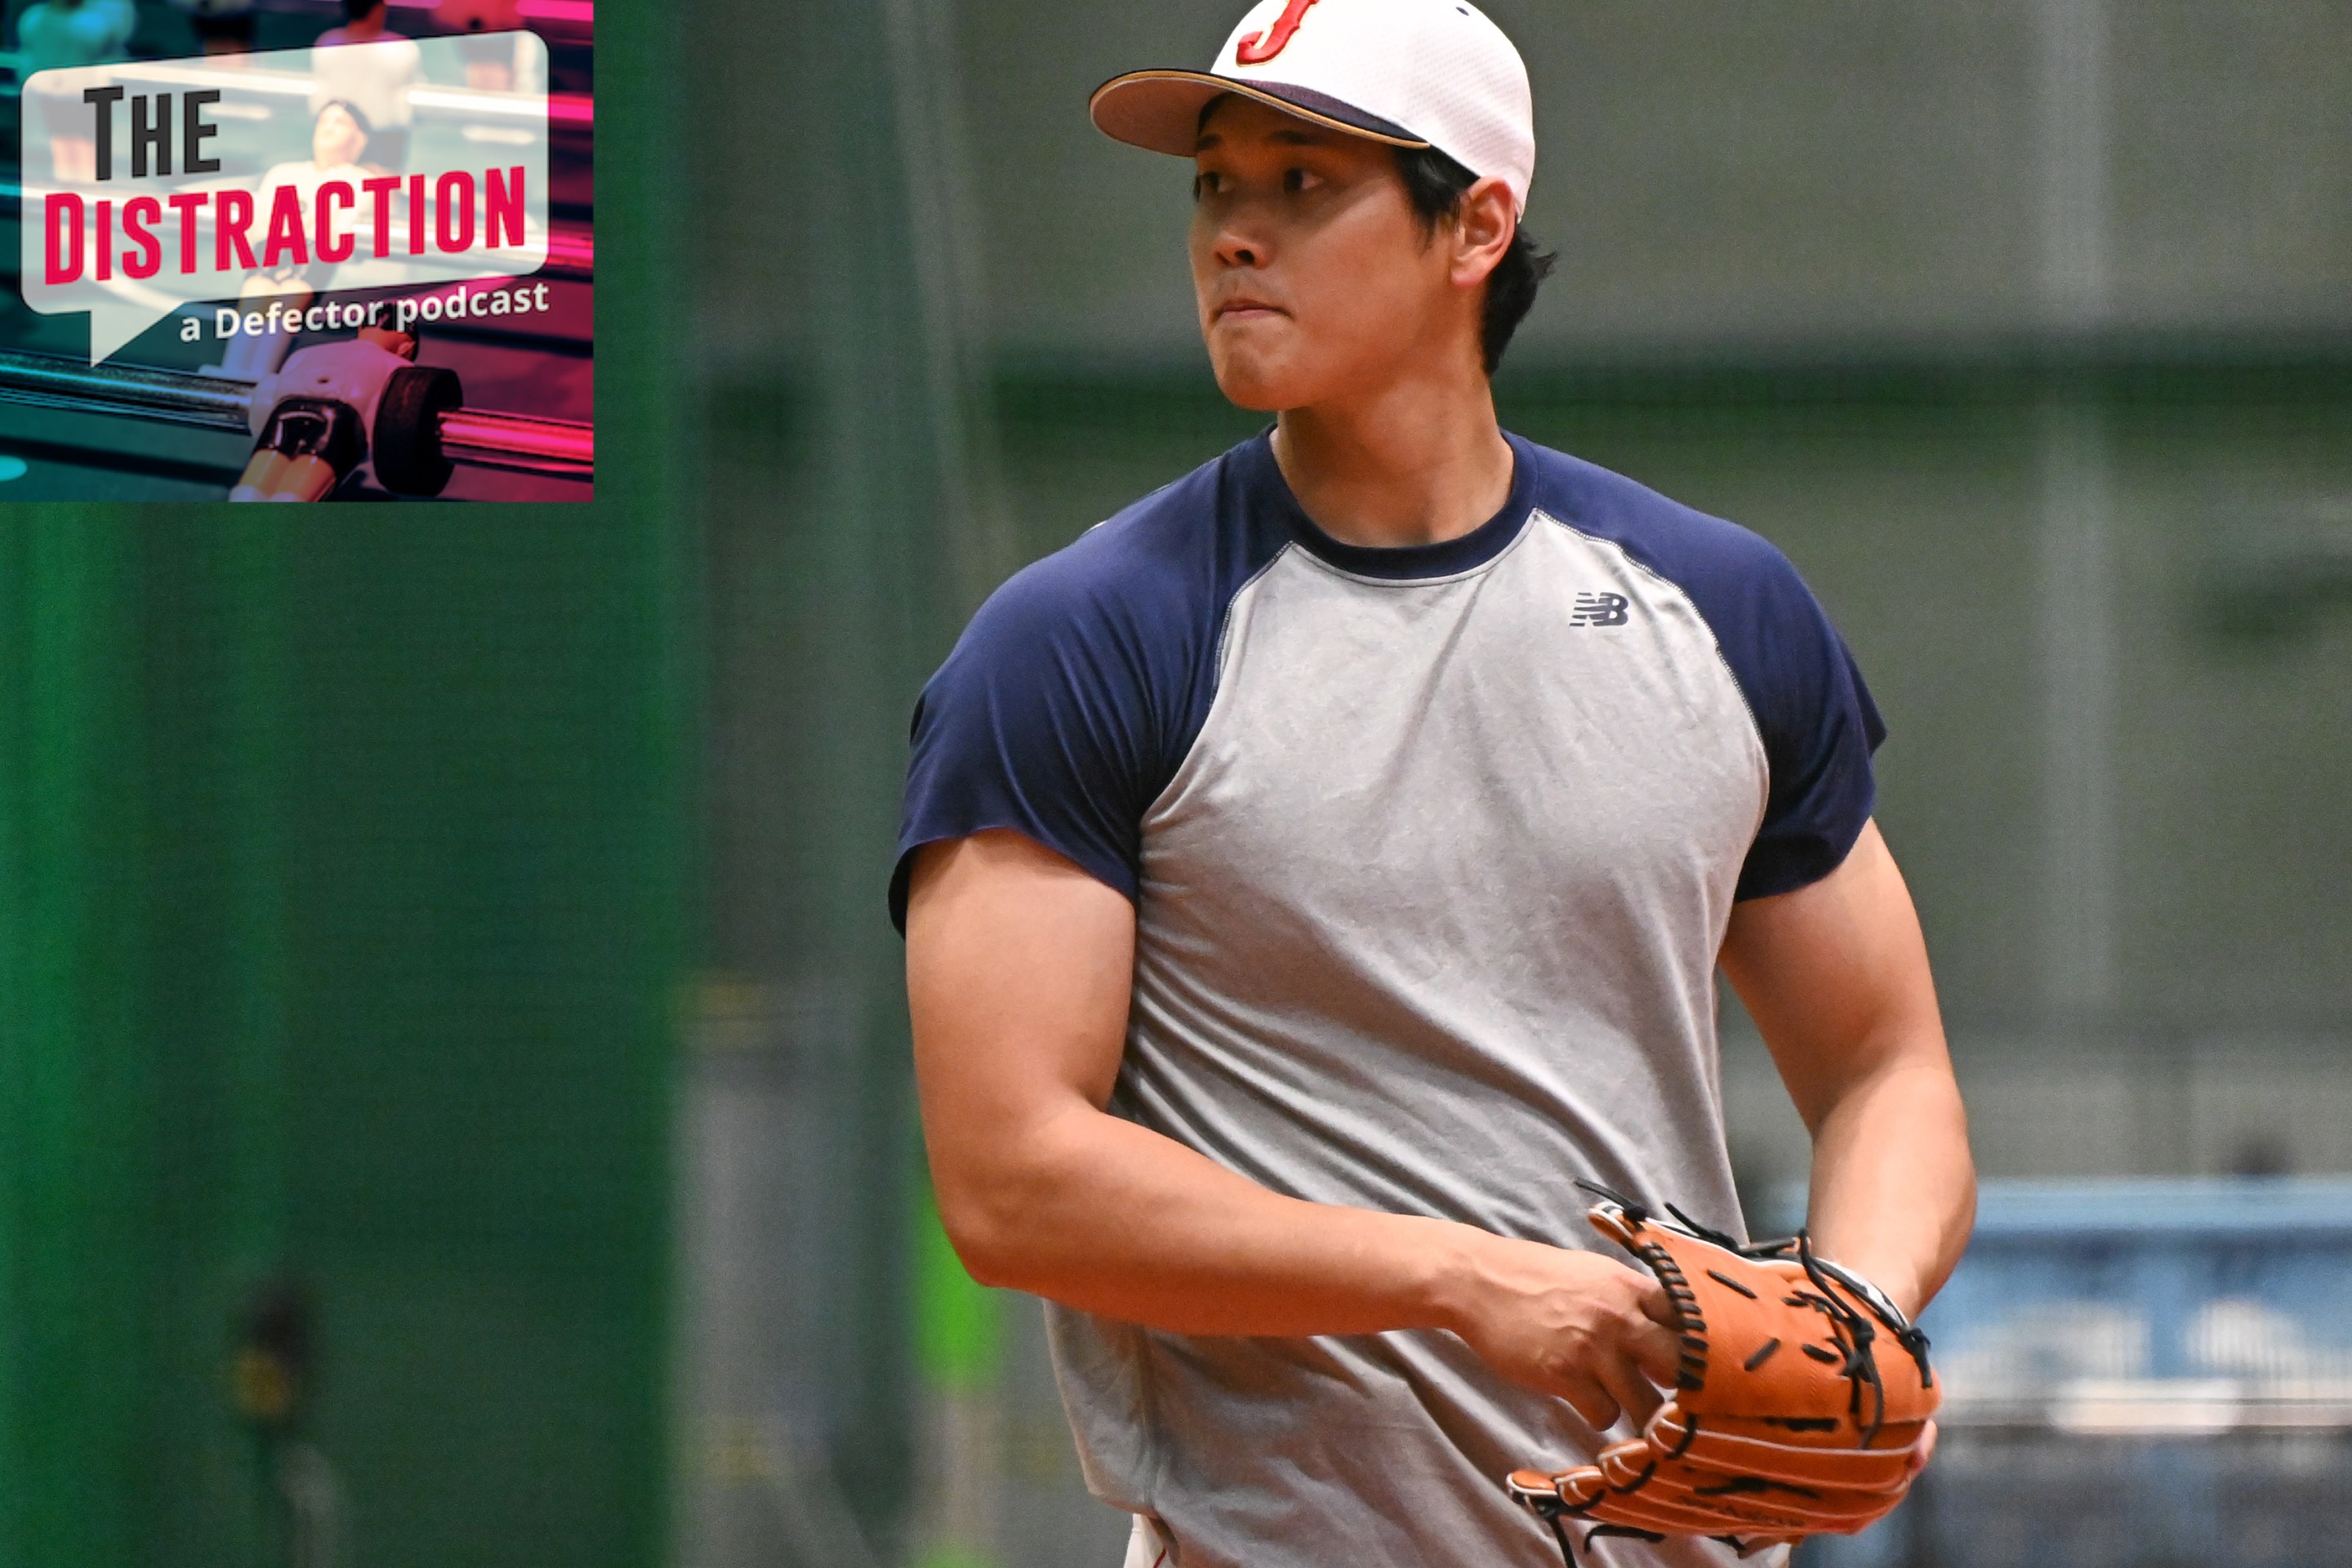 Shohei Ohtani looking swole as hell during Samurai Japan's training before the 2023 World Baseball Classic, with The Distraction logo at upper left.